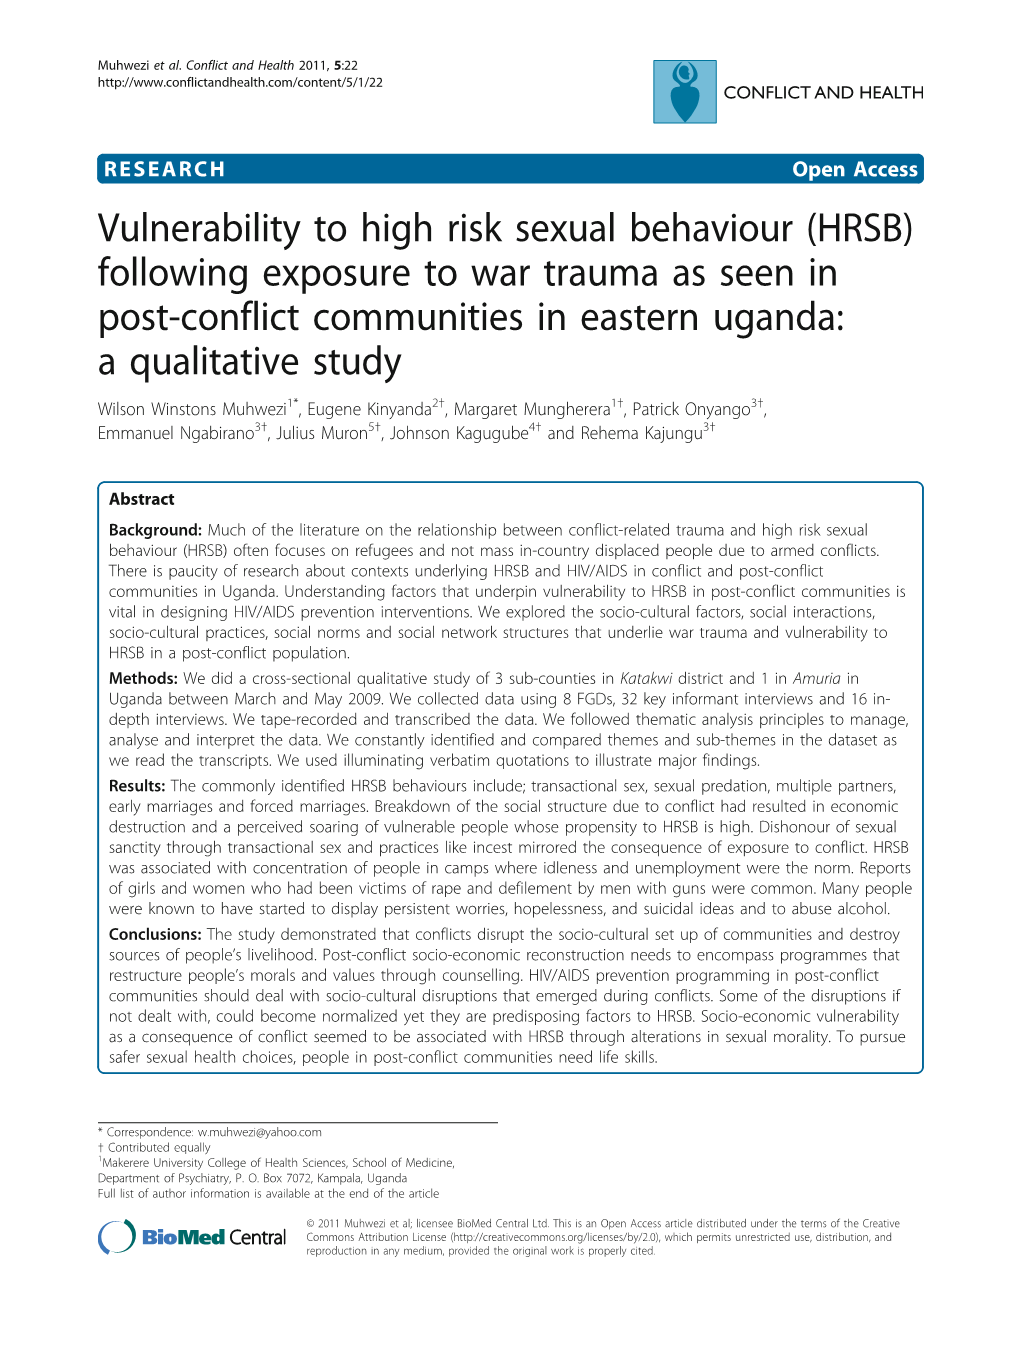 Vulnerability to High Risk Sexual Behaviour